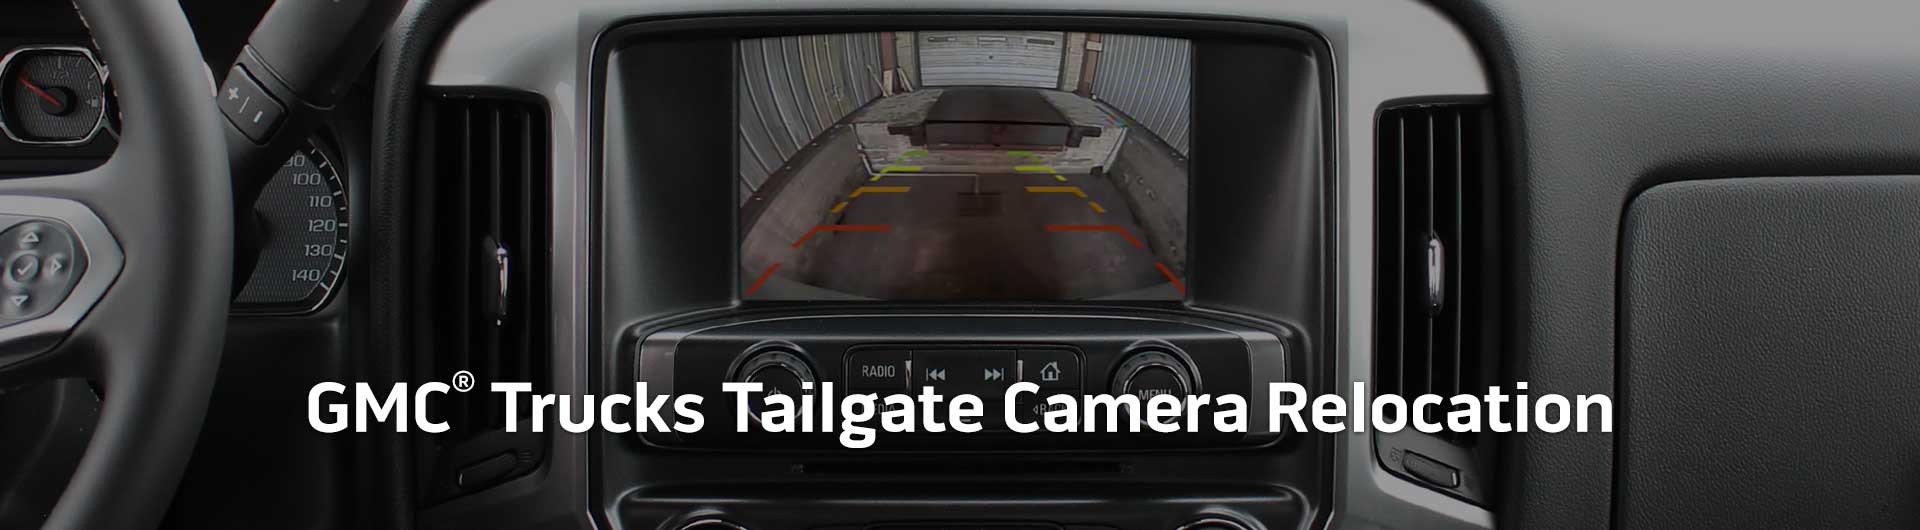 An image showing the in-dash monitor of a GMC truck. The in-dash monitor shows that the truck is in reverse and is displaying both the backup camera and video from the cameras on the front and side of the truck. The image has text that reads GMC Trucks Tailgate Camera Relocation.